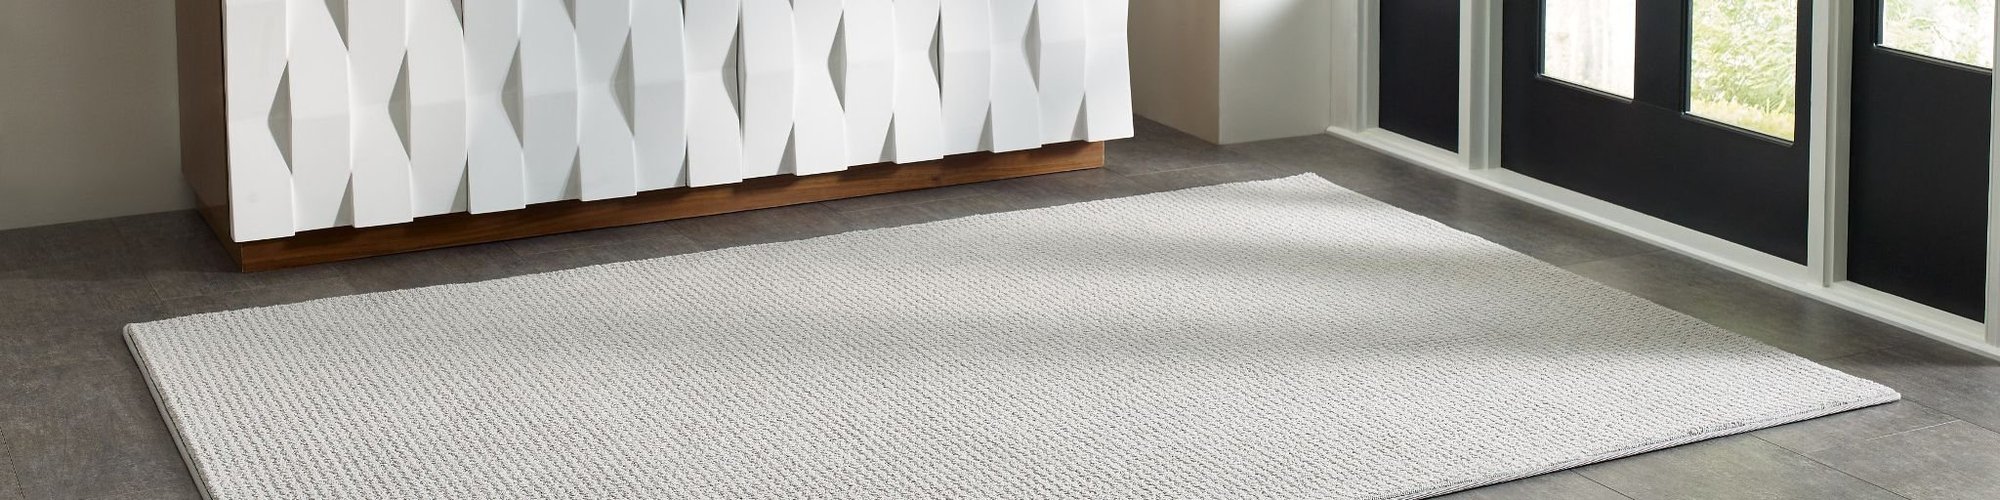 Mineral Mix Designed In Style: Mid-Century Modern from Rob's Carpet and Flooring in Northvale, NJ